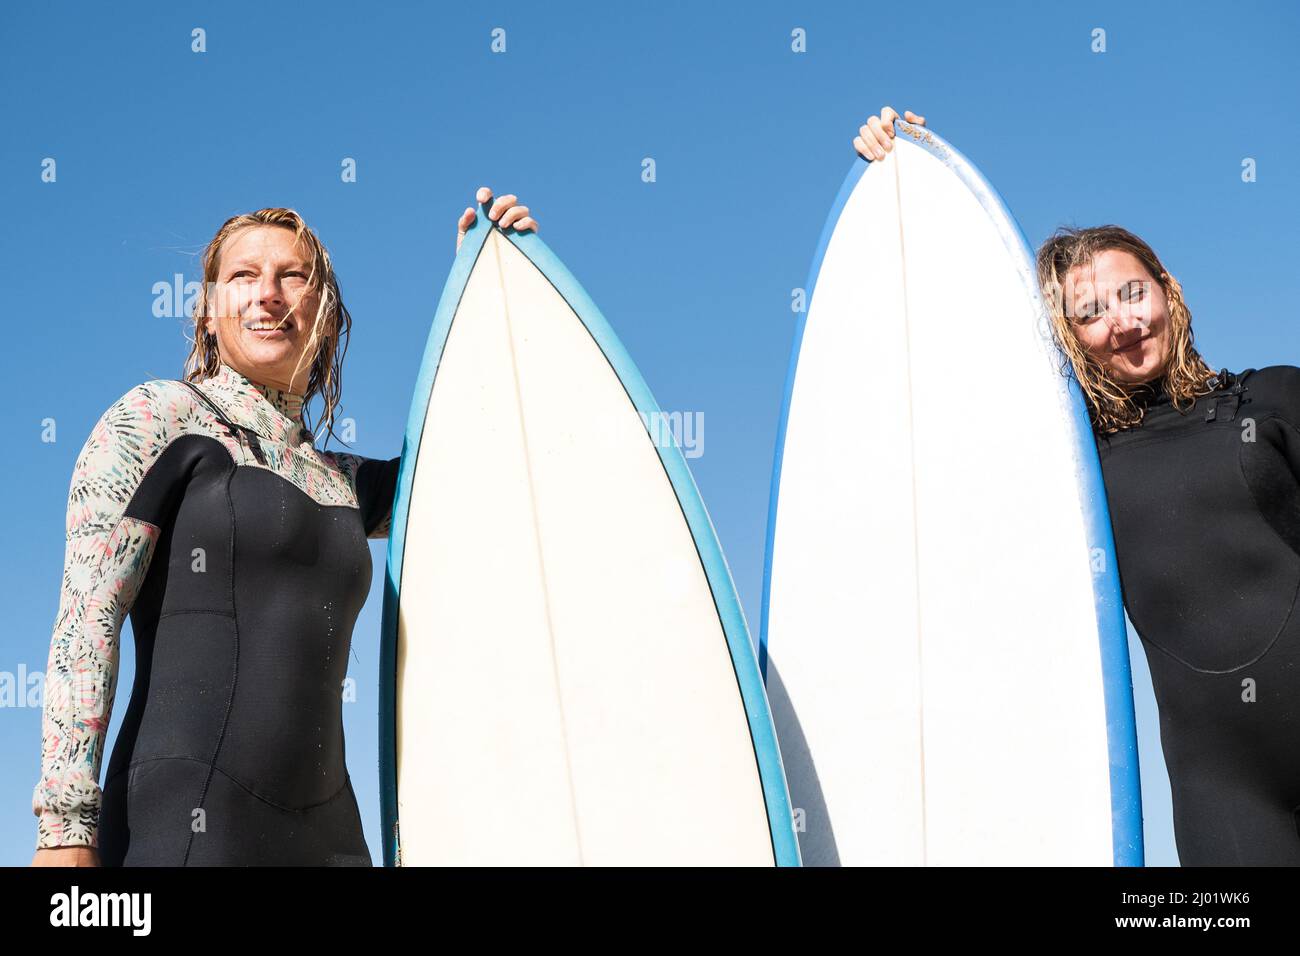 2 Caucasian female surfers portrait standing with surfboards. They are wearing winter wetsuits Stock Photo